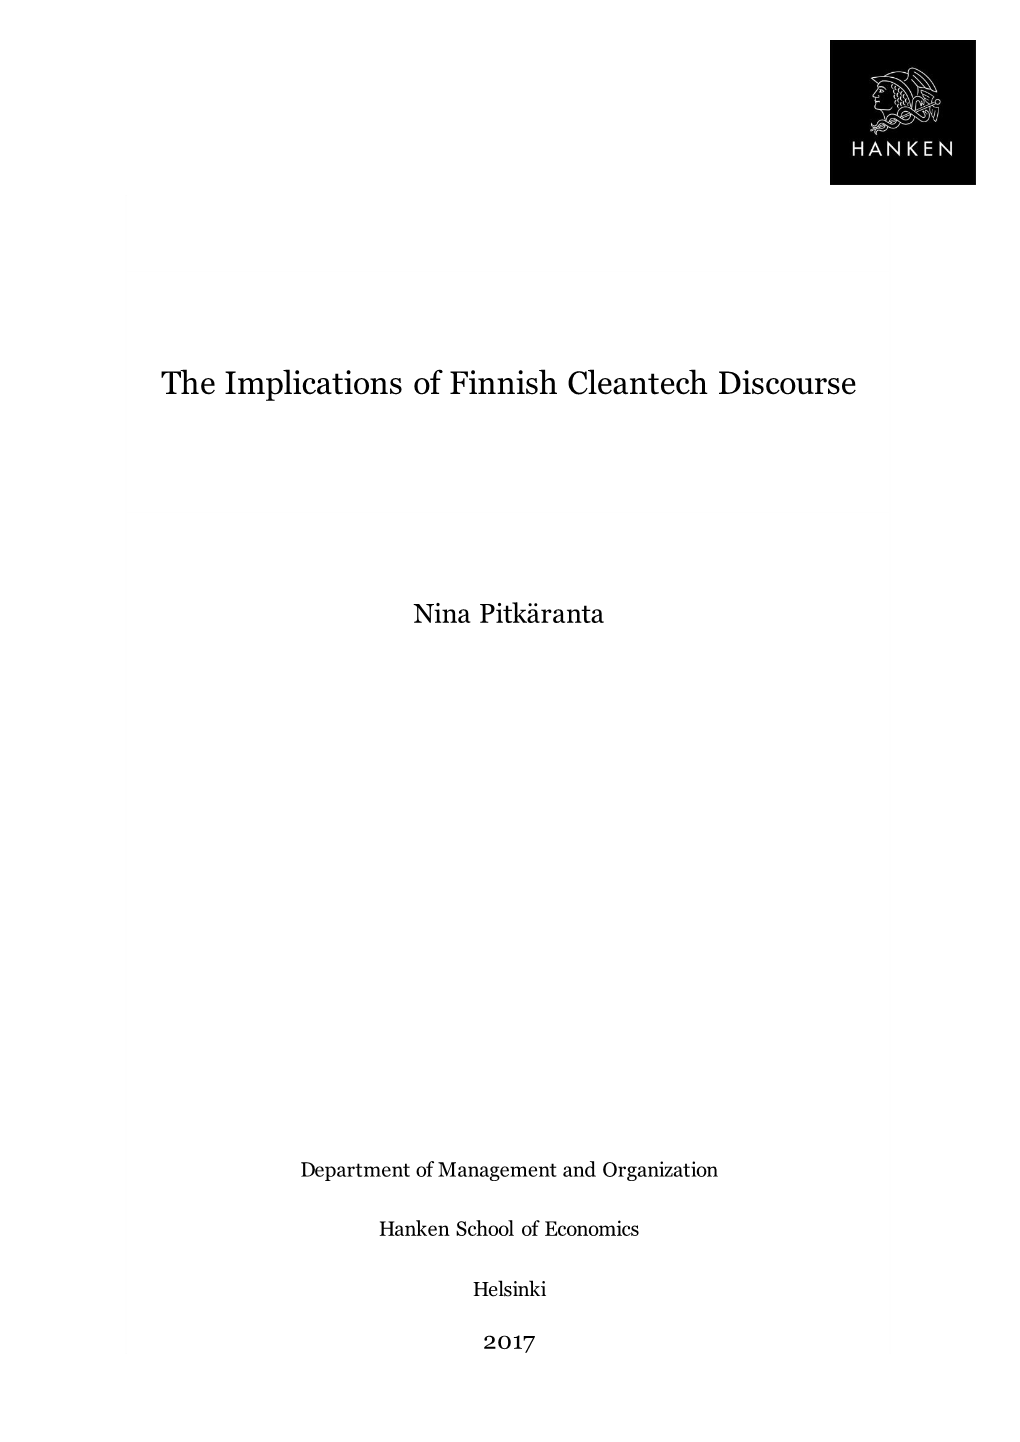 The Implications of Finnish Cleantech Discourse